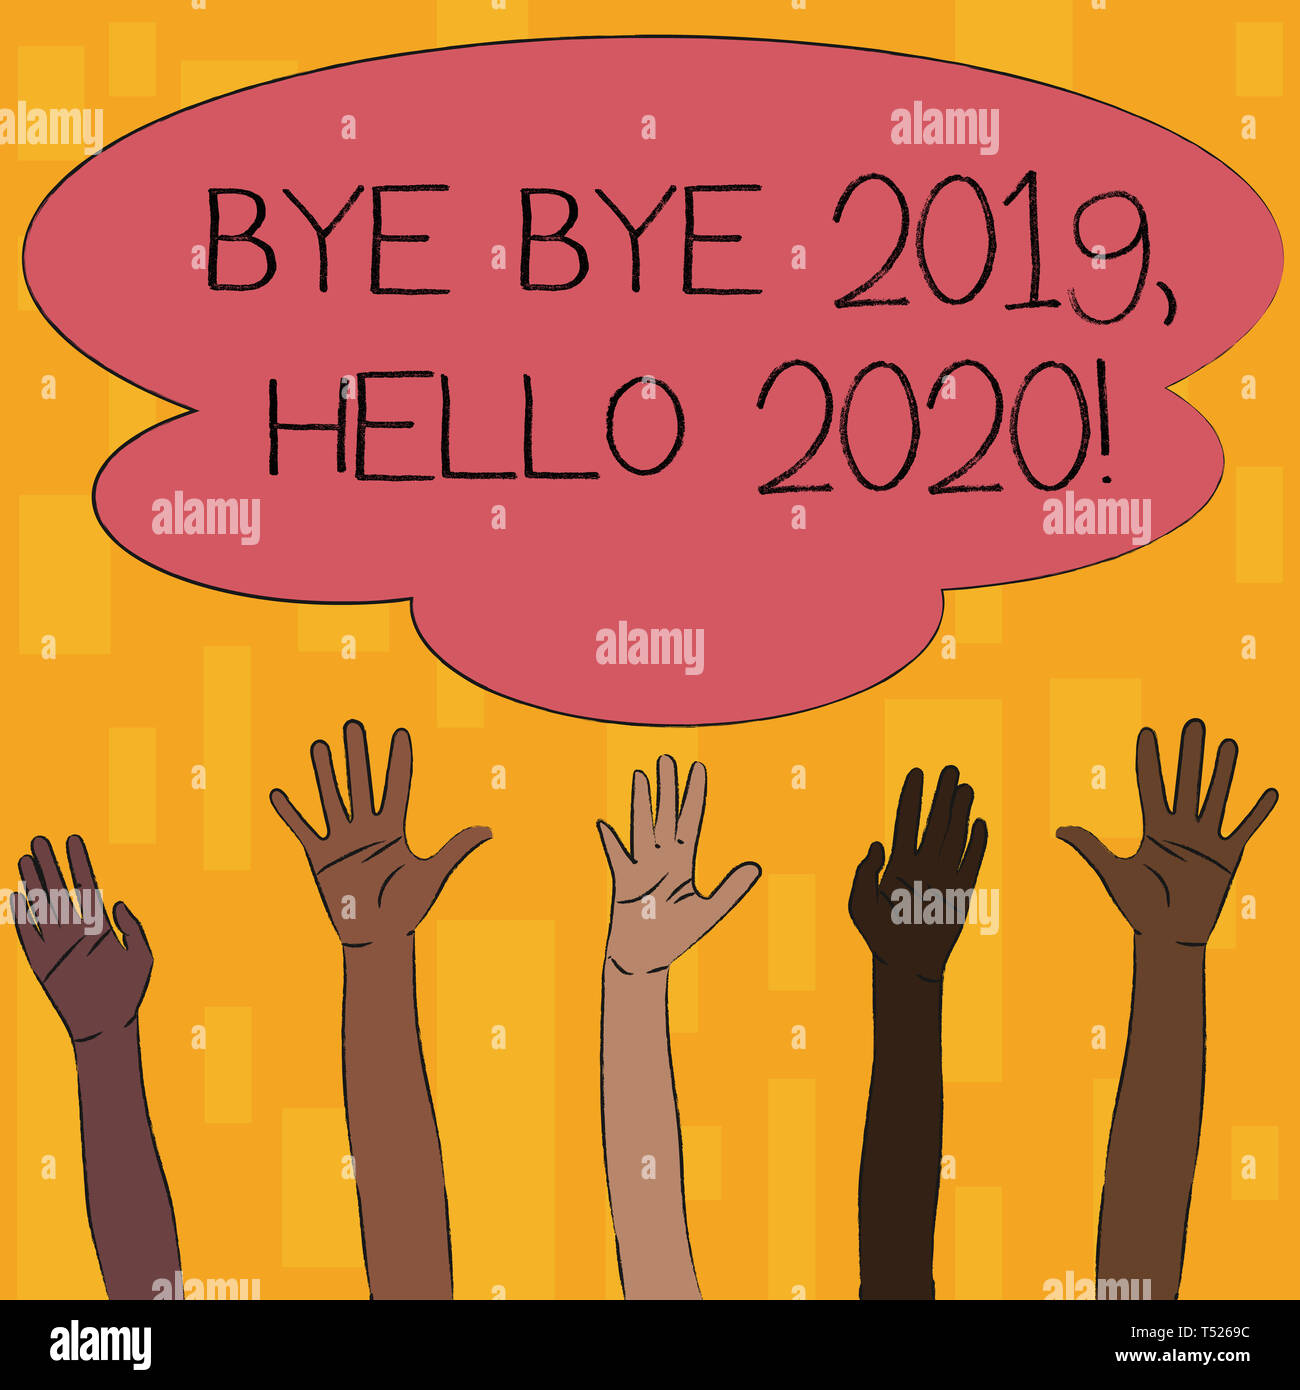 Text Sign Showing Bye Bye 19 Hello Business Photo Text Saying Goodbye To Last Year And Welcoming Another Good One Multiracial Diversity Hands Stock Photo Alamy